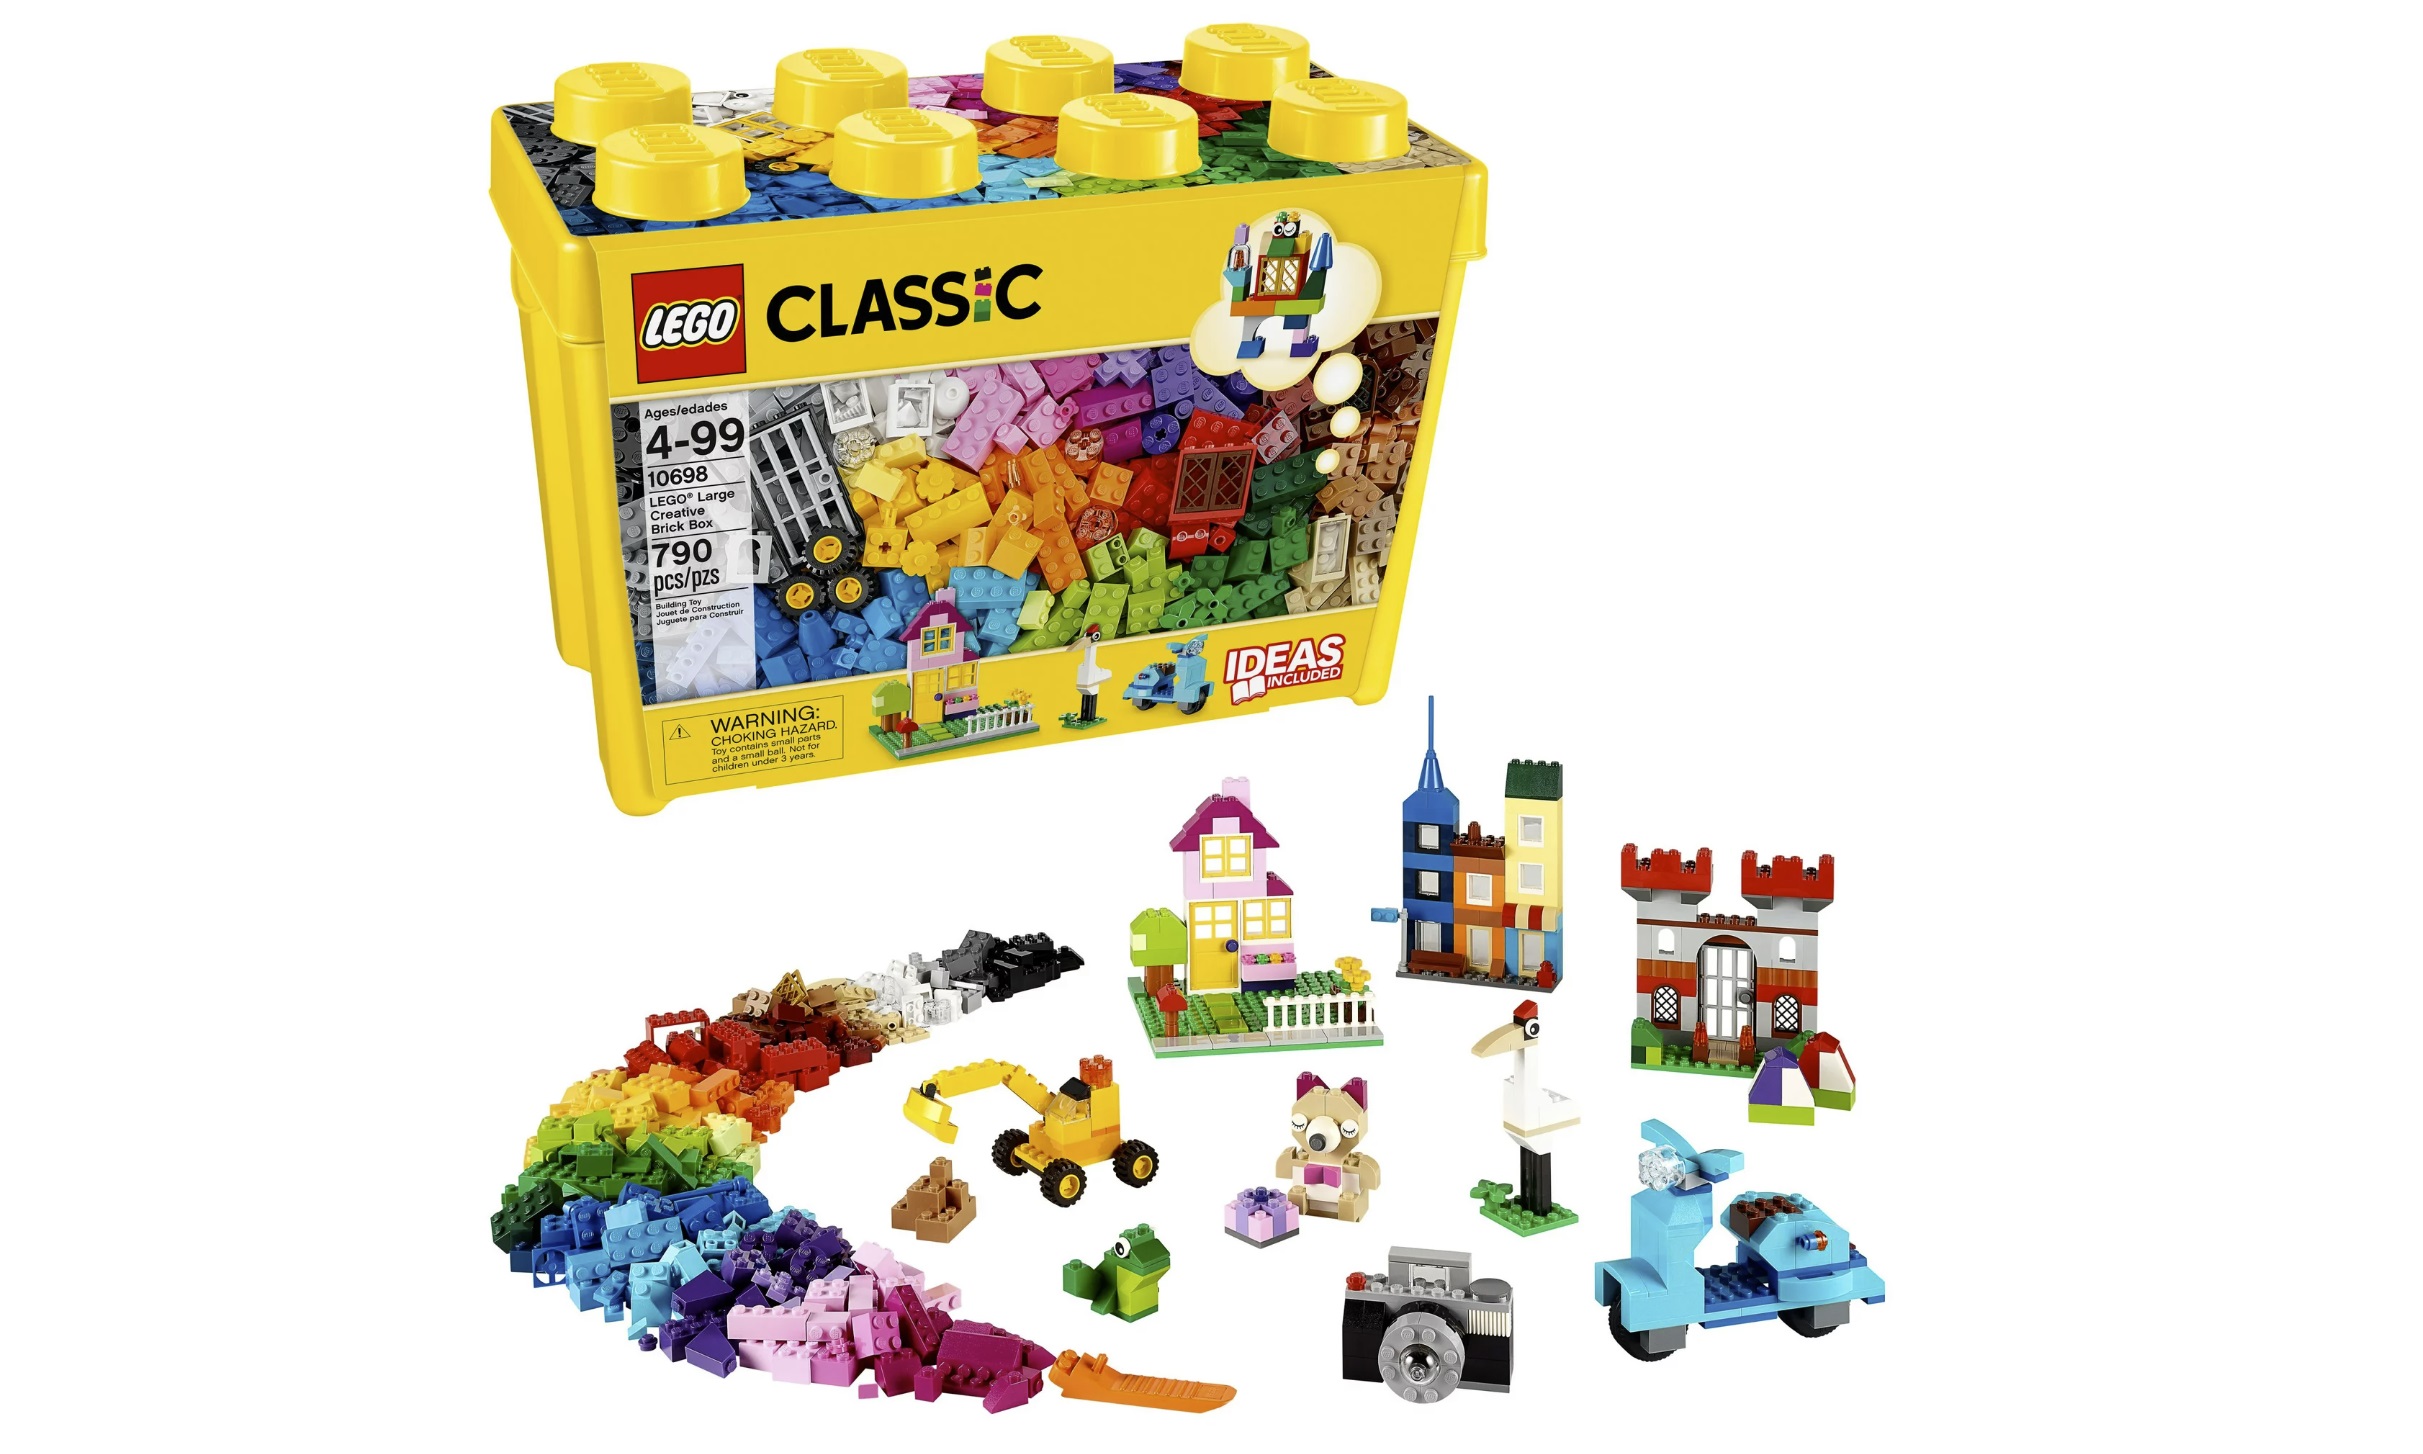 Lego box with some miscellaneous creations and blocks strewn about.